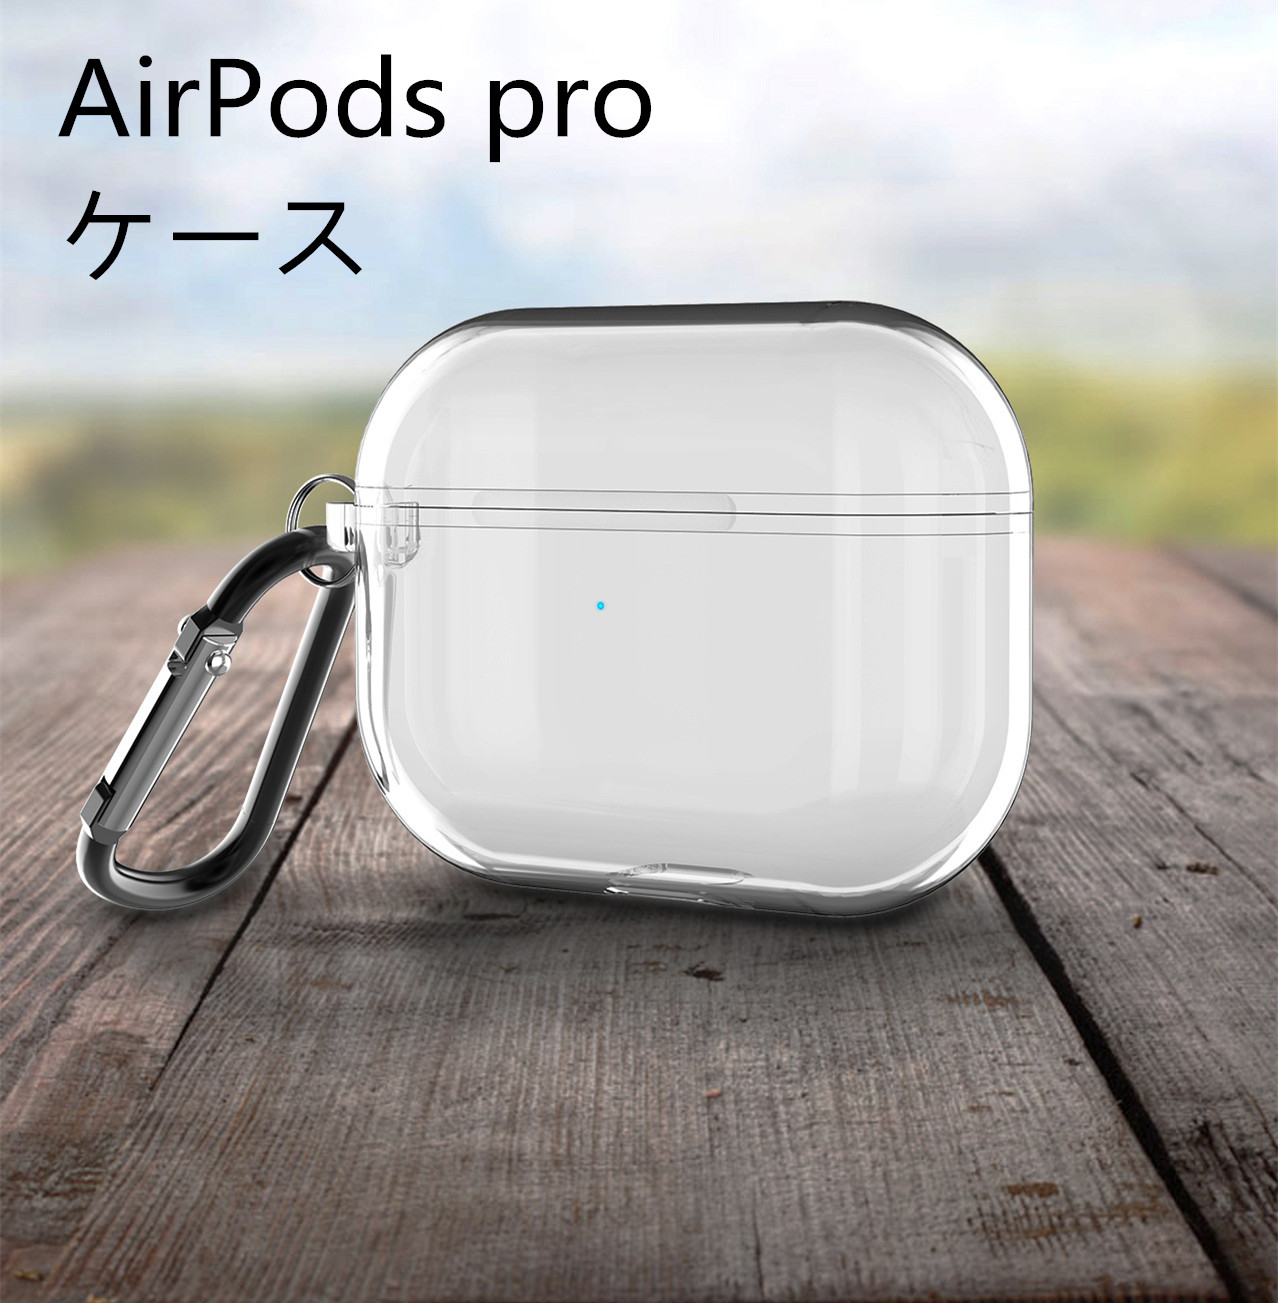 AirPods proケース クリアケース airpods3 airpods Pro イヤホンカバー AirPodsケース